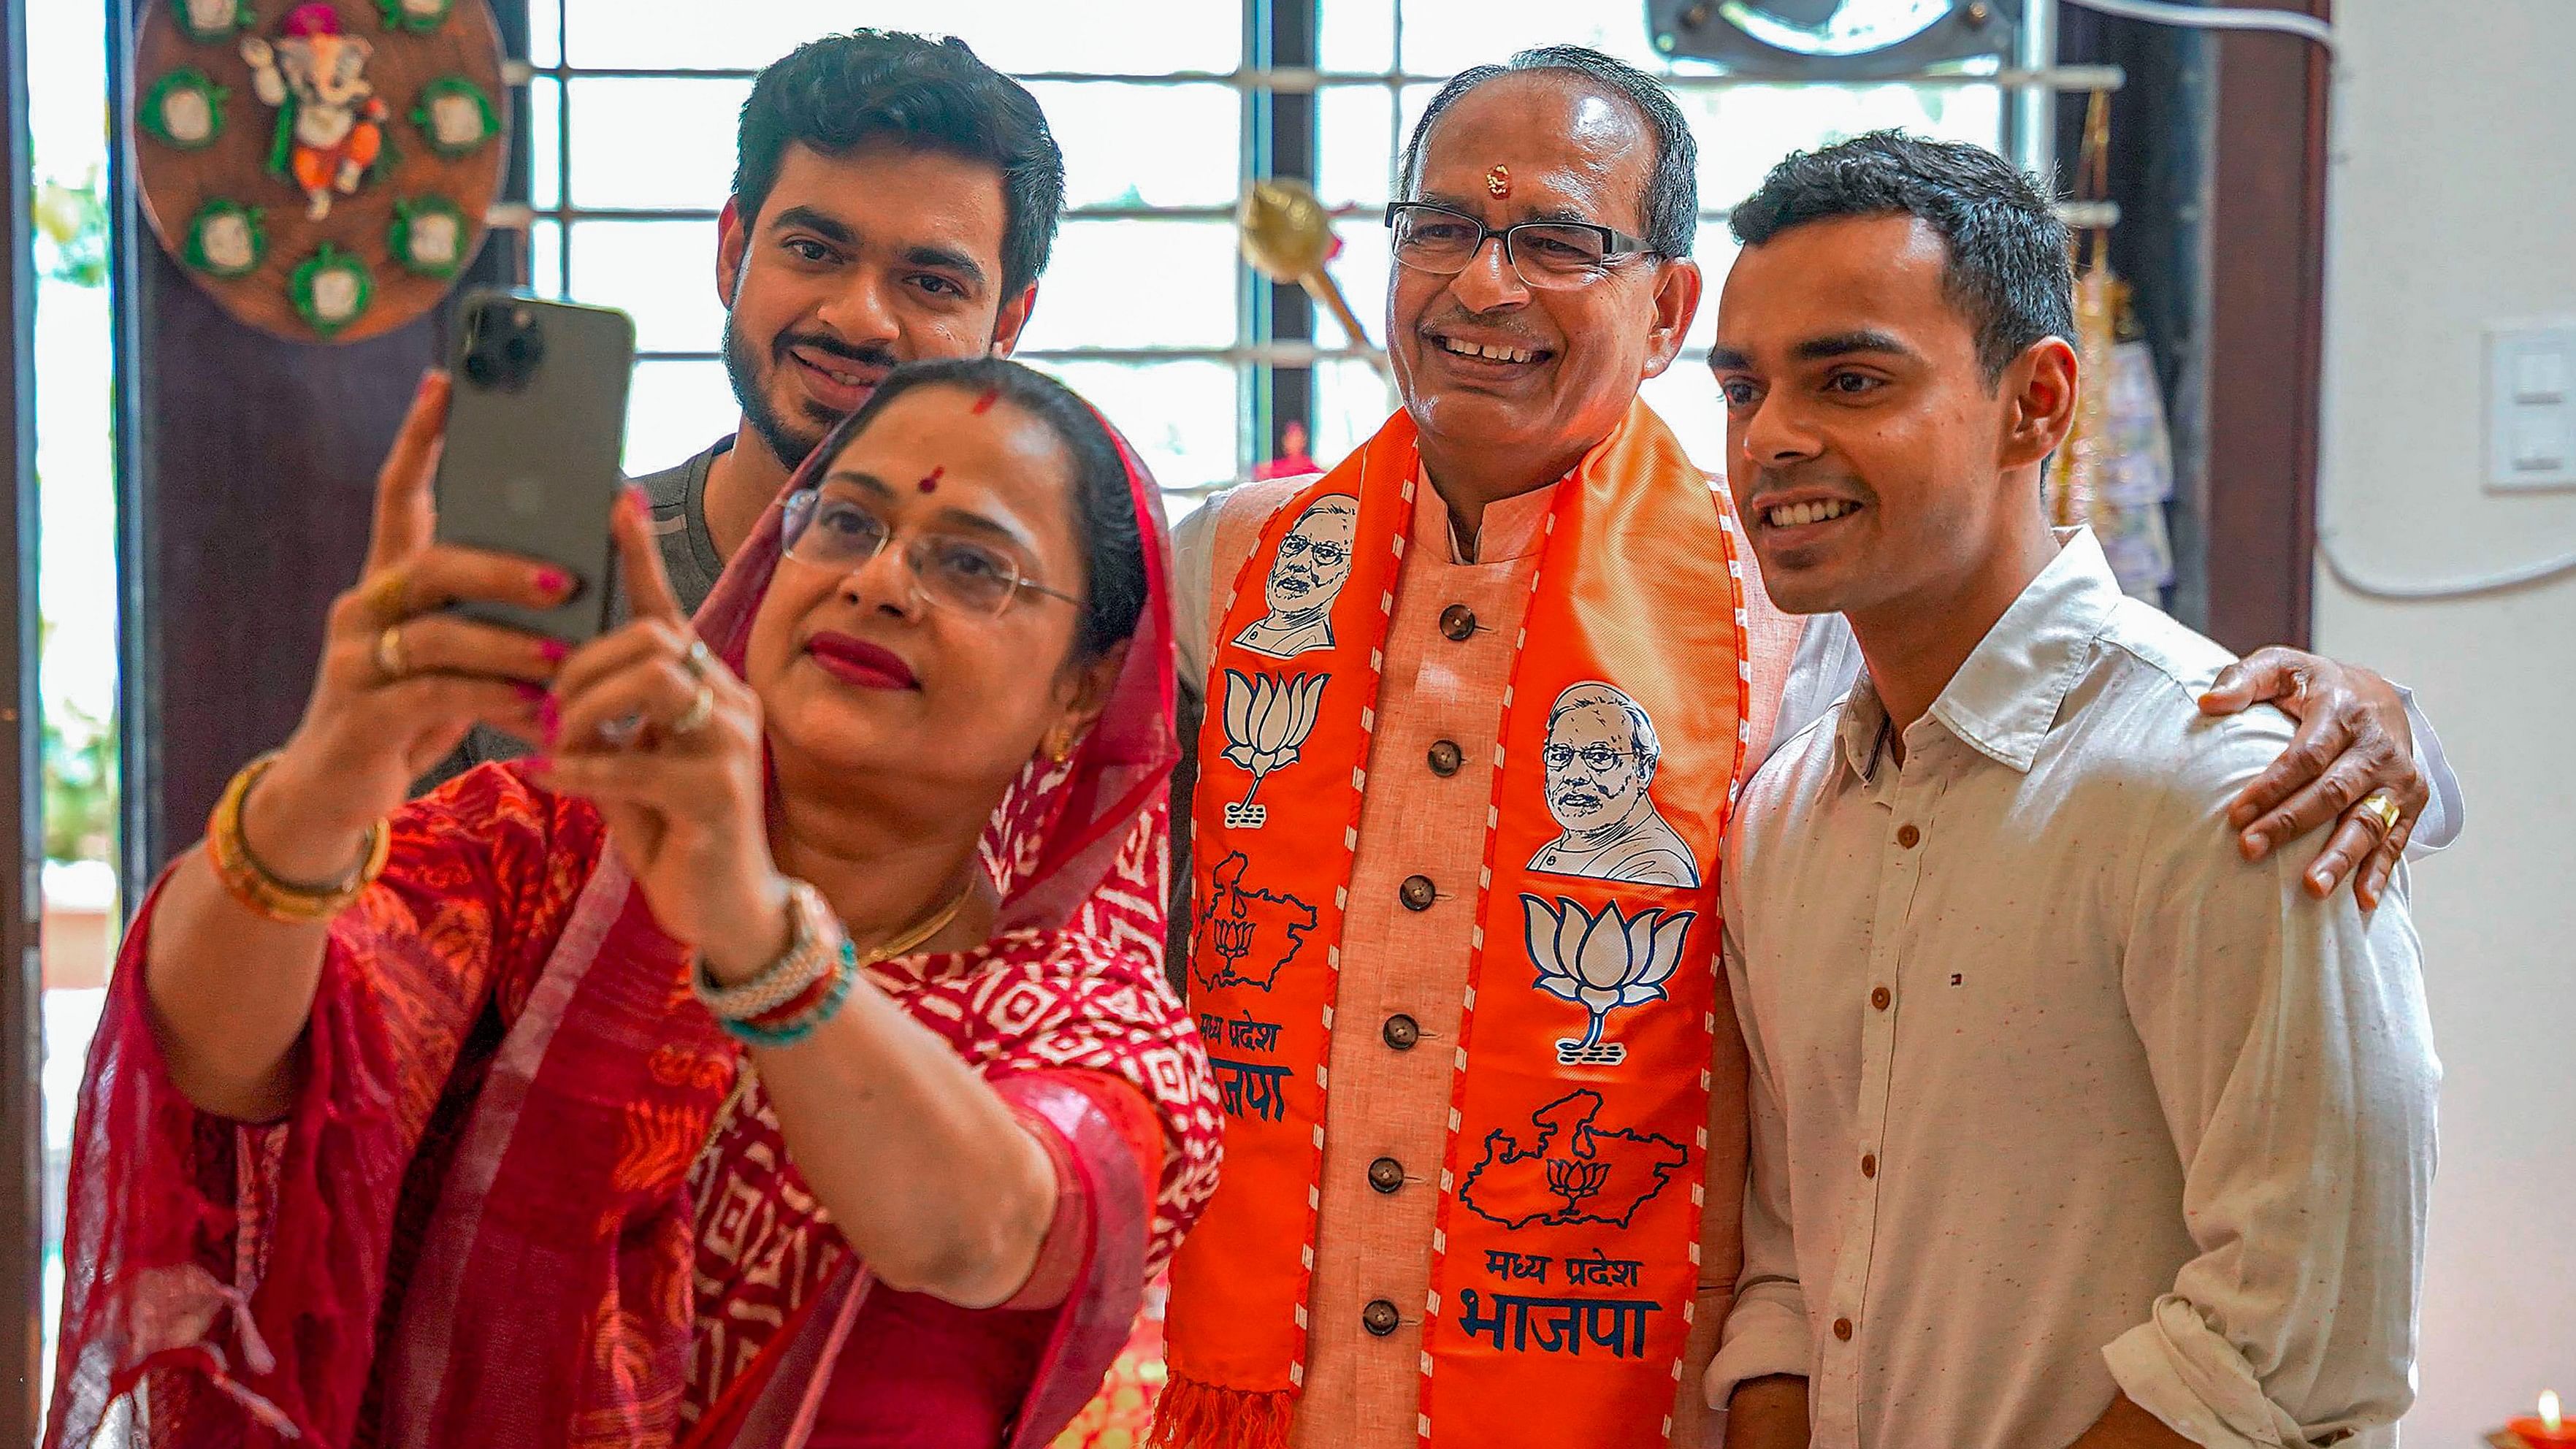 <div class="paragraphs"><p>Former Madhya Pradesh chief minister and BJP candidate from Vidisha constituency Shivraj Singh Chouhan with his wife Sadhna Singh and sons Kartikeya Singh Chouhan and Kunal Singh Chouhan poses for selfies in Bhopal.</p></div>